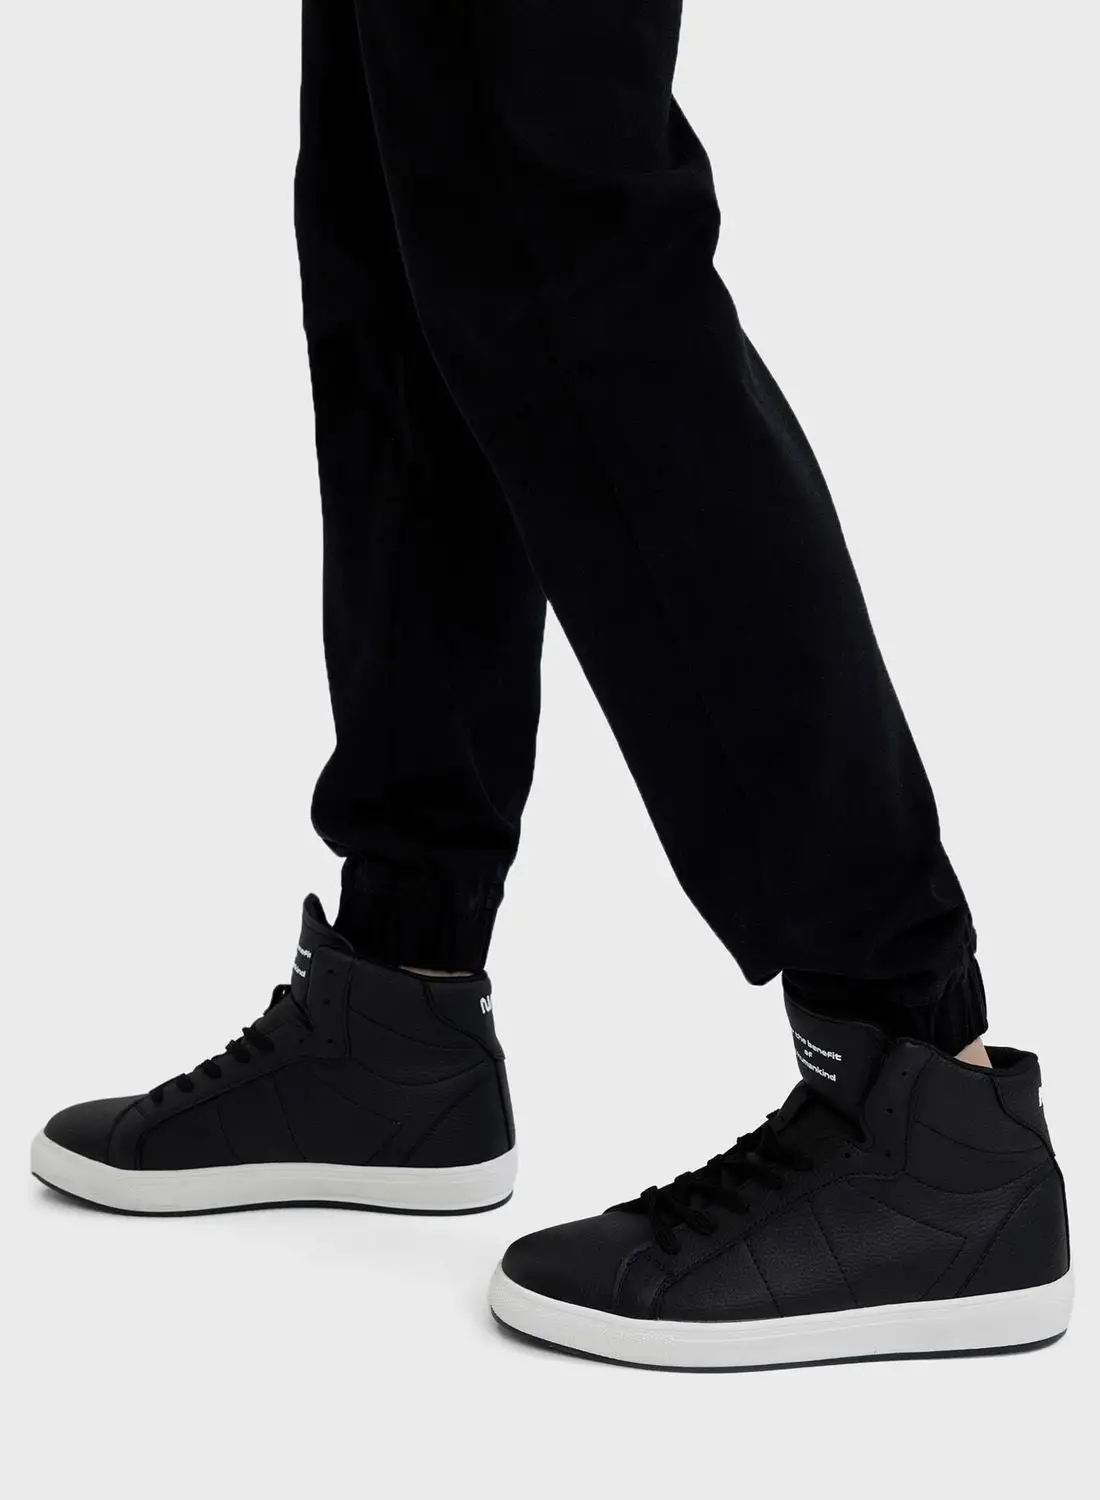 DeFacto Lace Up High Top Sneakers